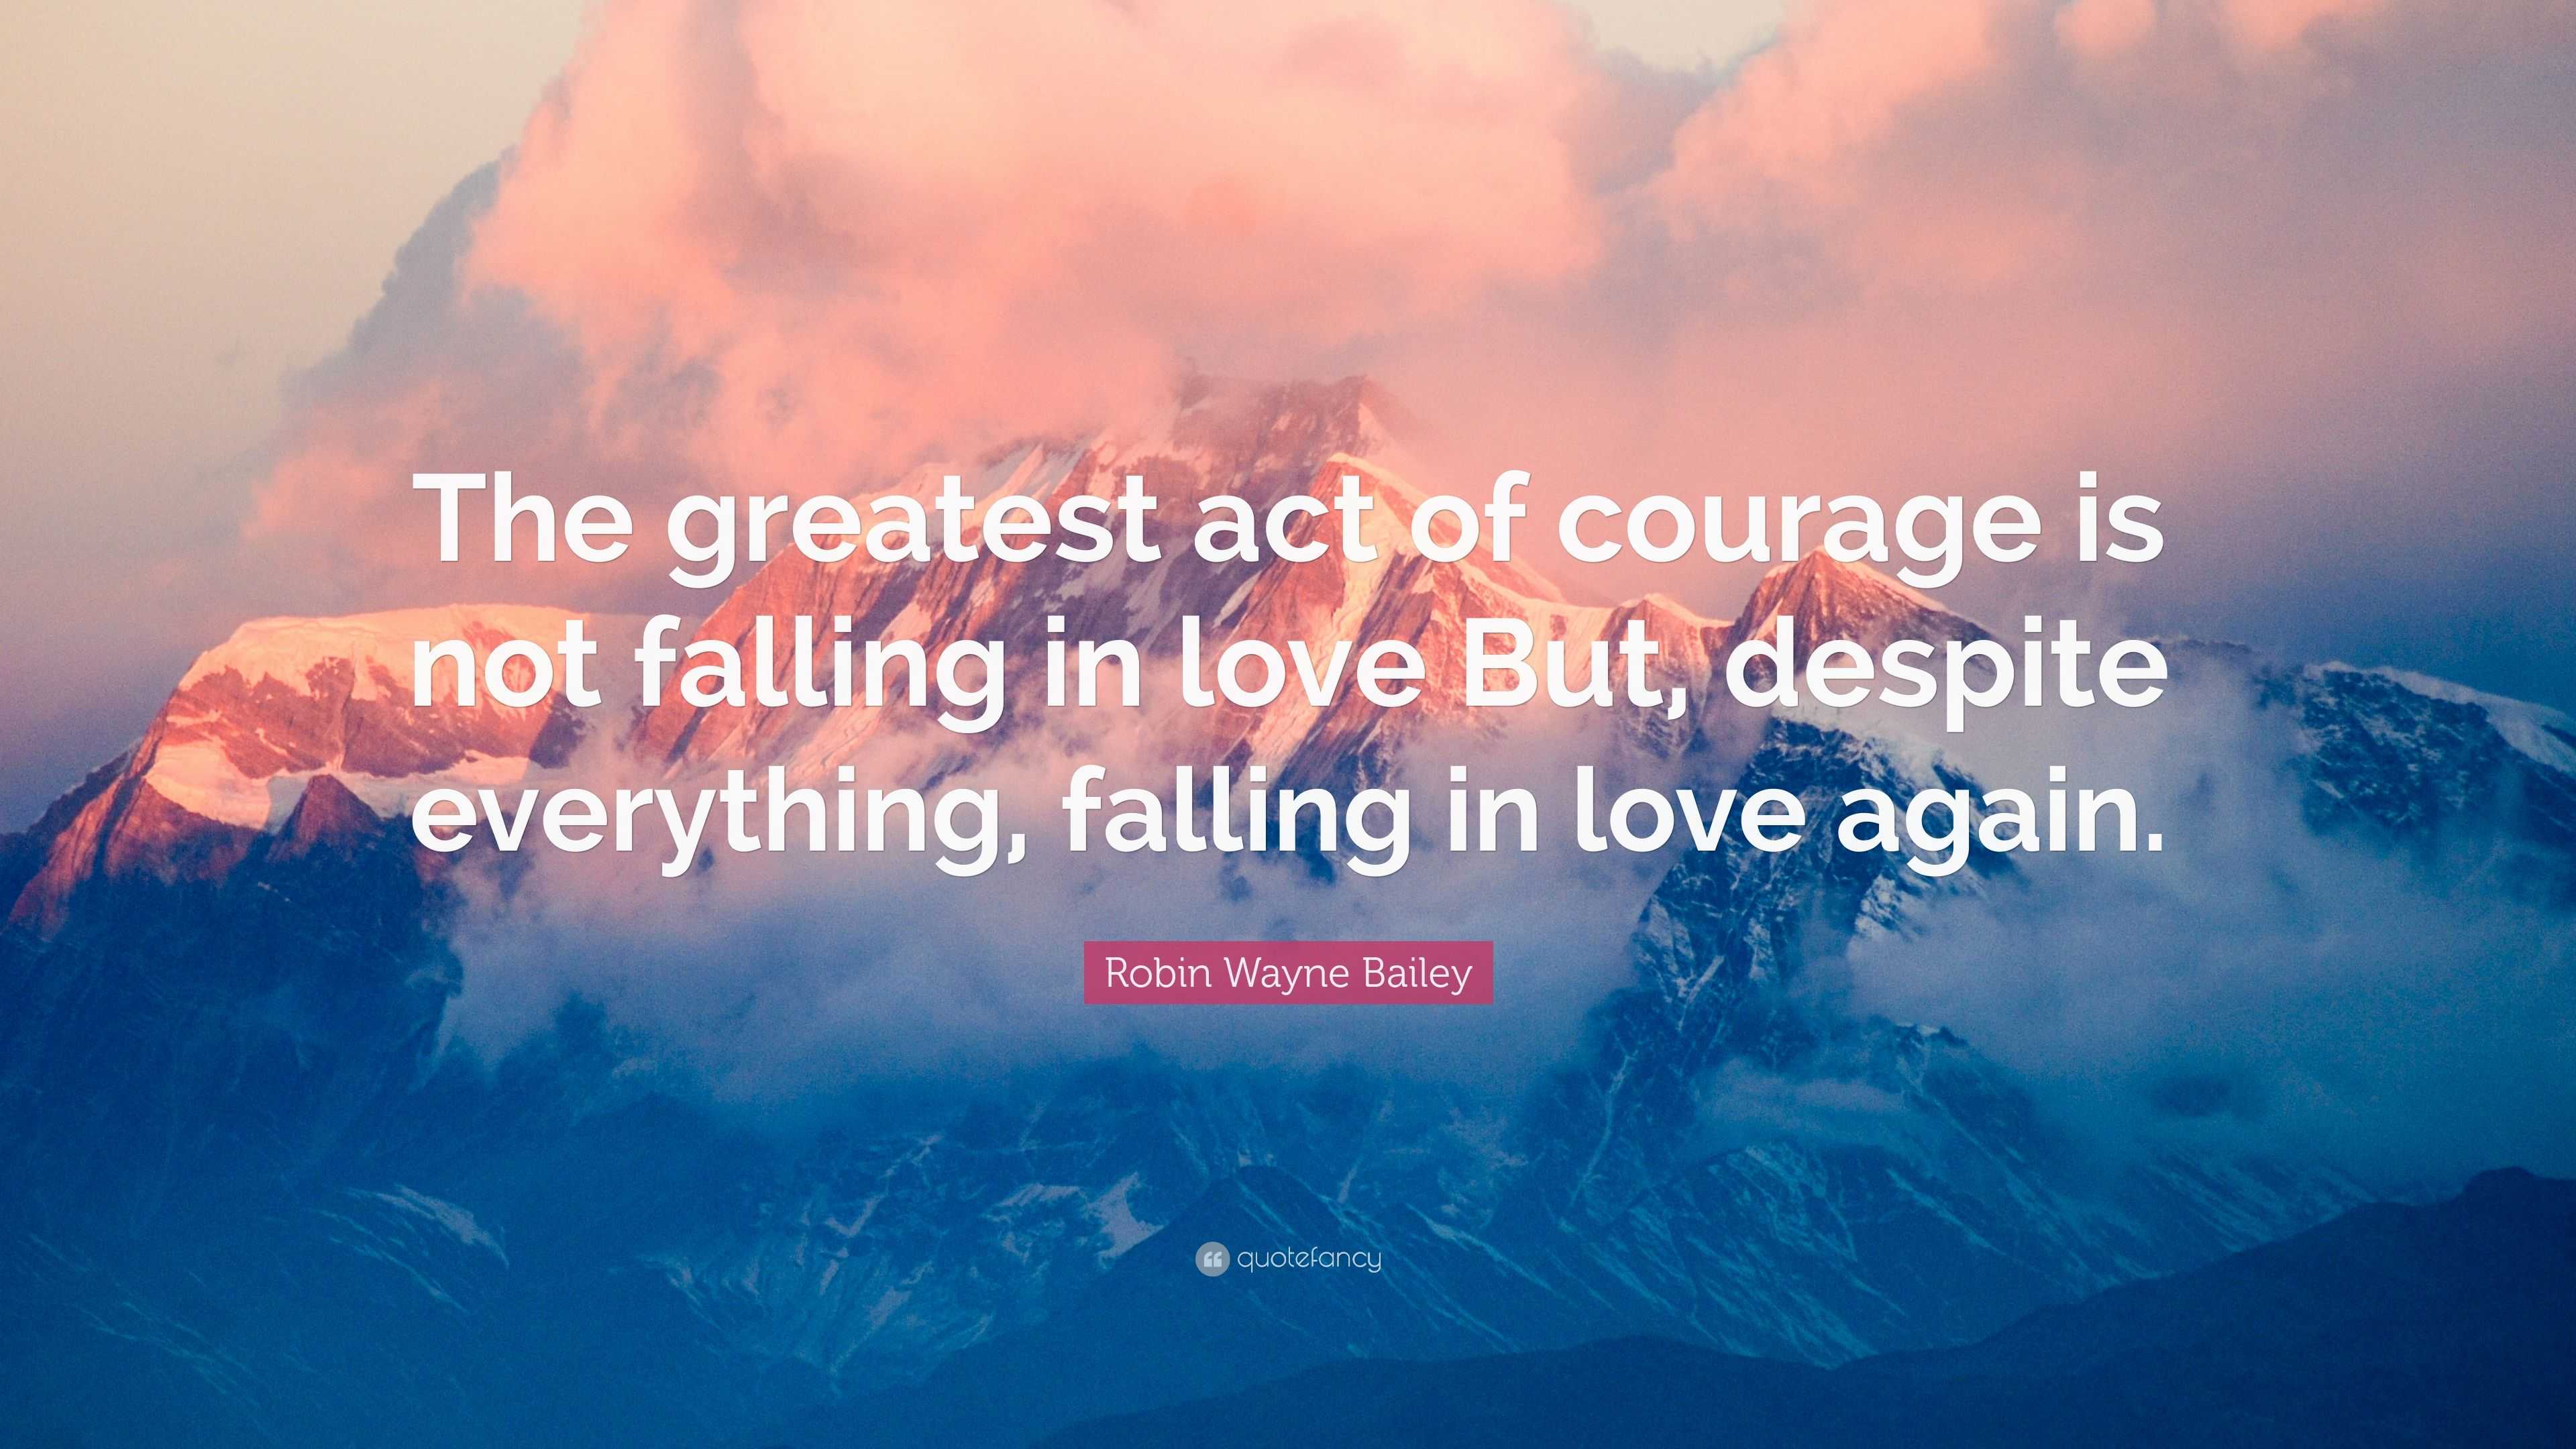 Robin Wayne Bailey Quote: “The greatest act of courage is not falling ...